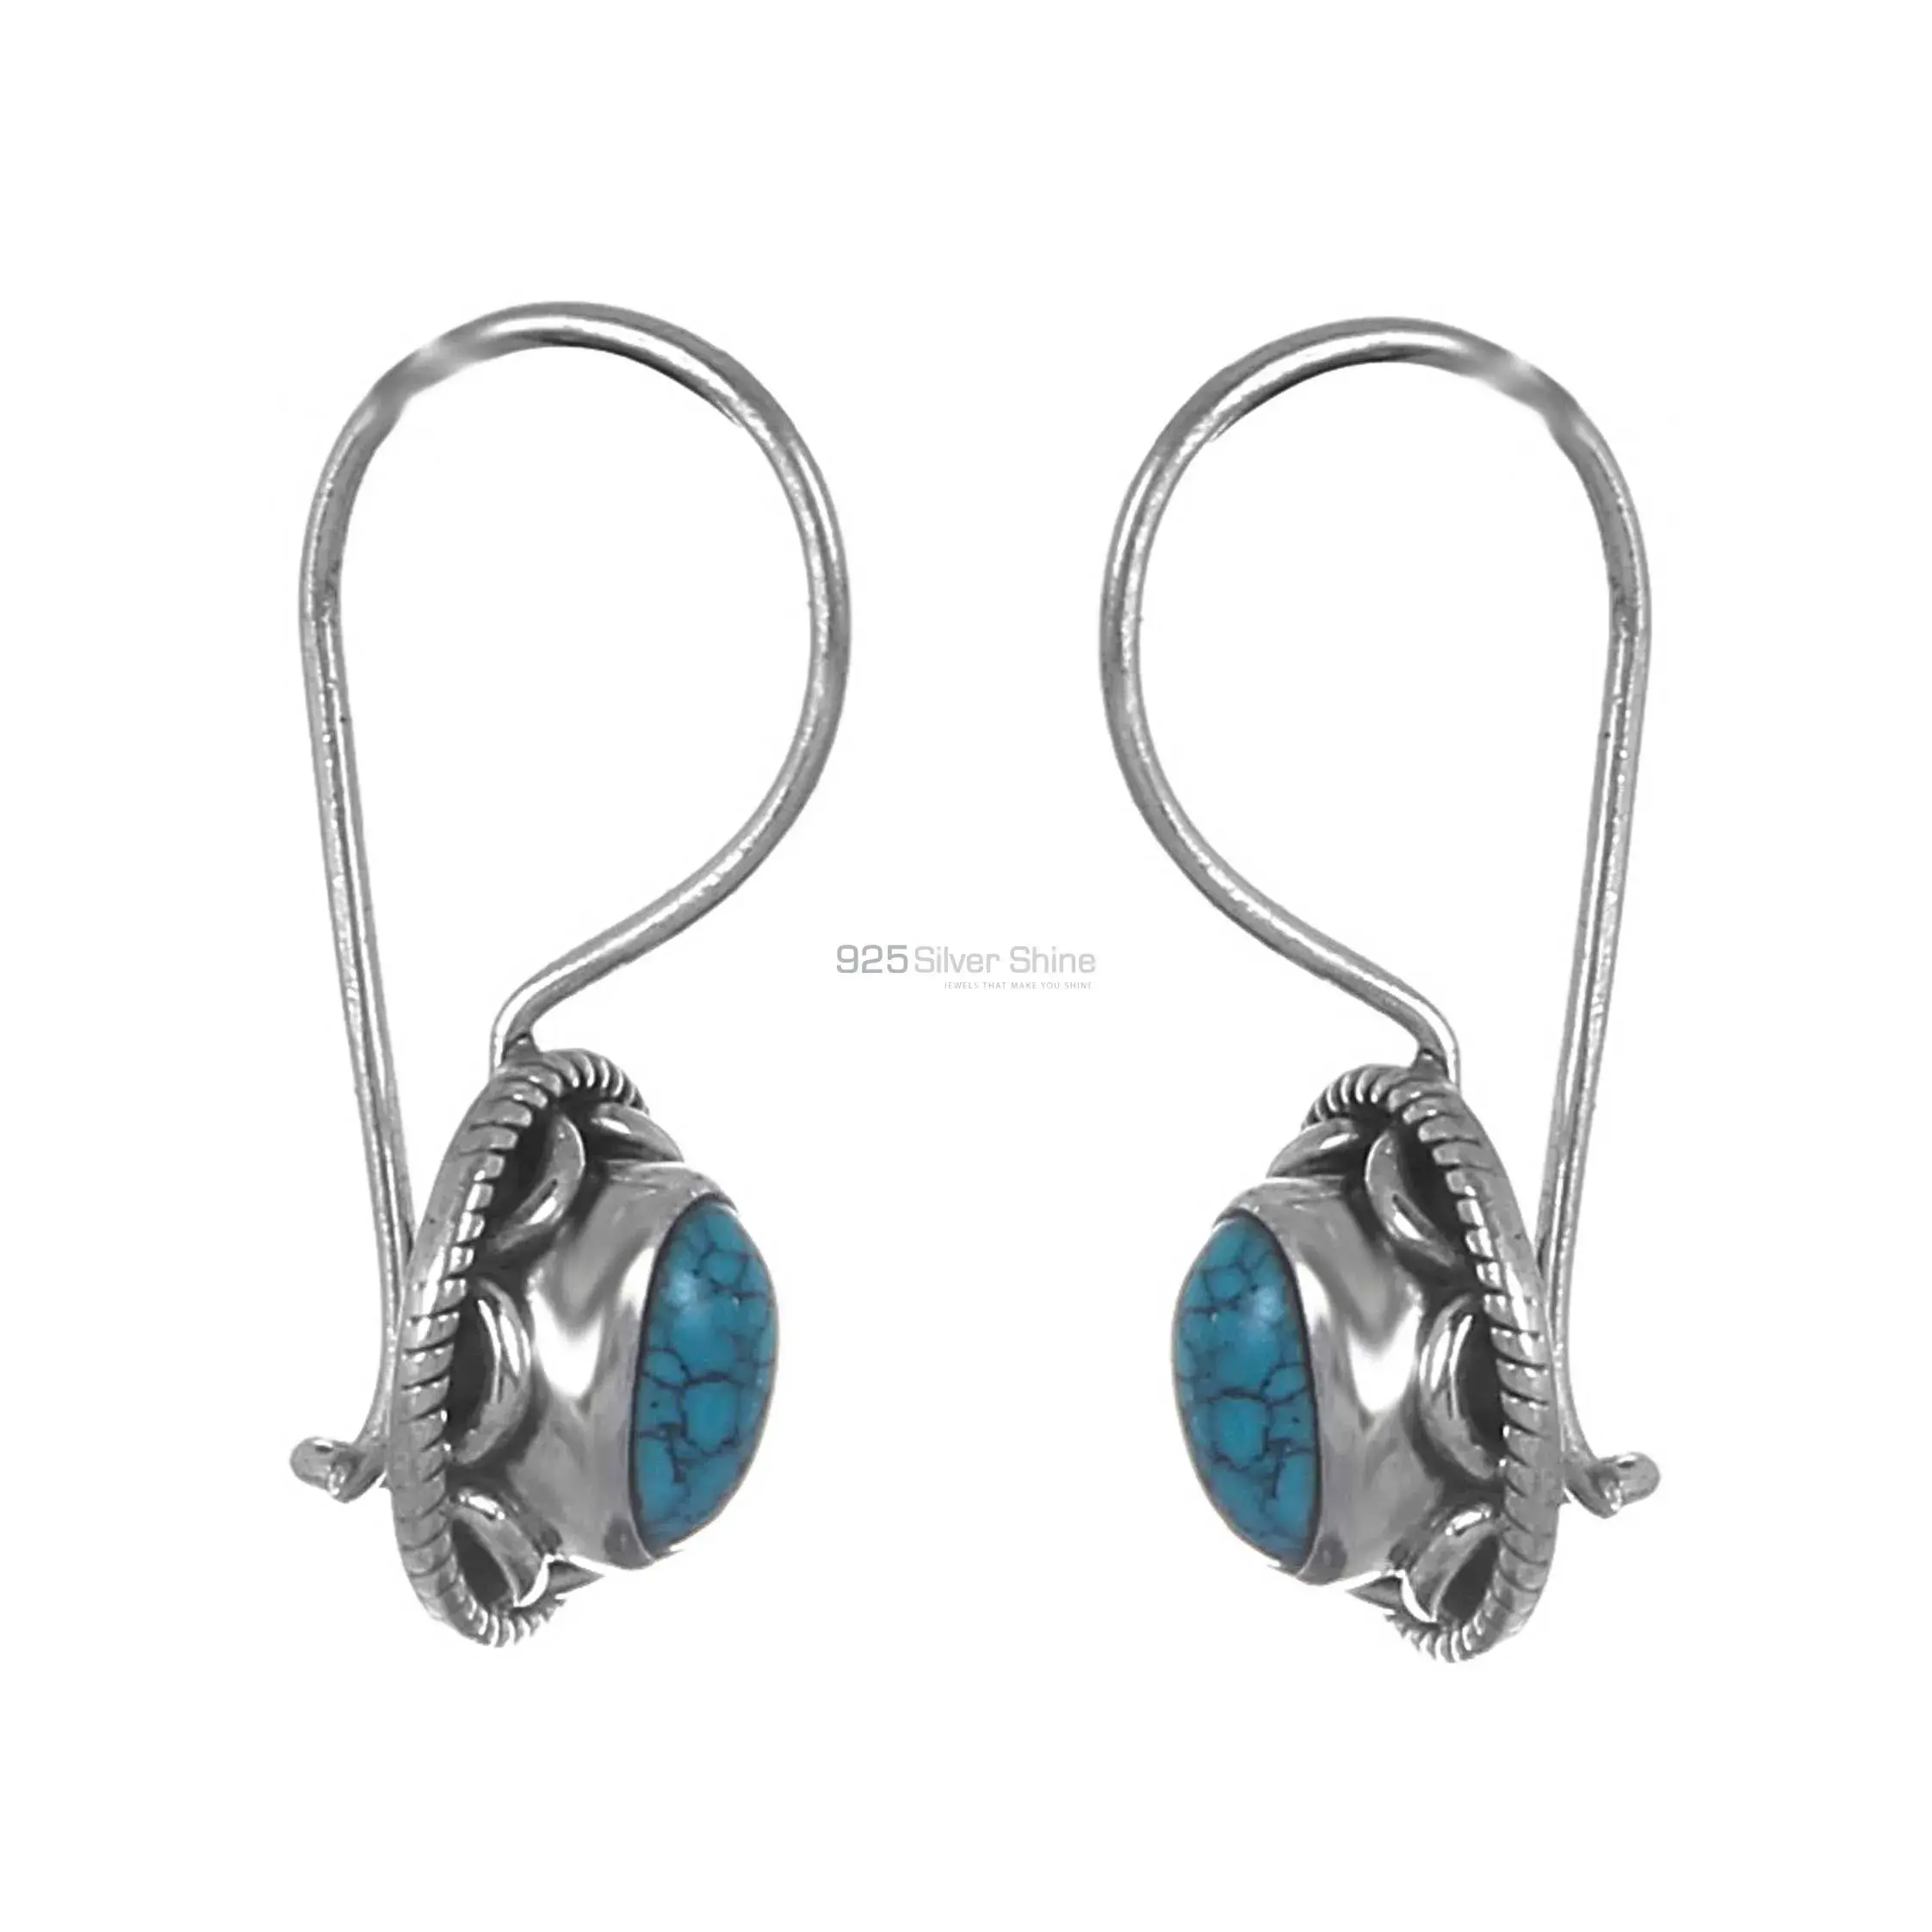 Wholesale Sterling Silver Earring In Natural Turquoise Gemstone Jewelry 925SE195_0